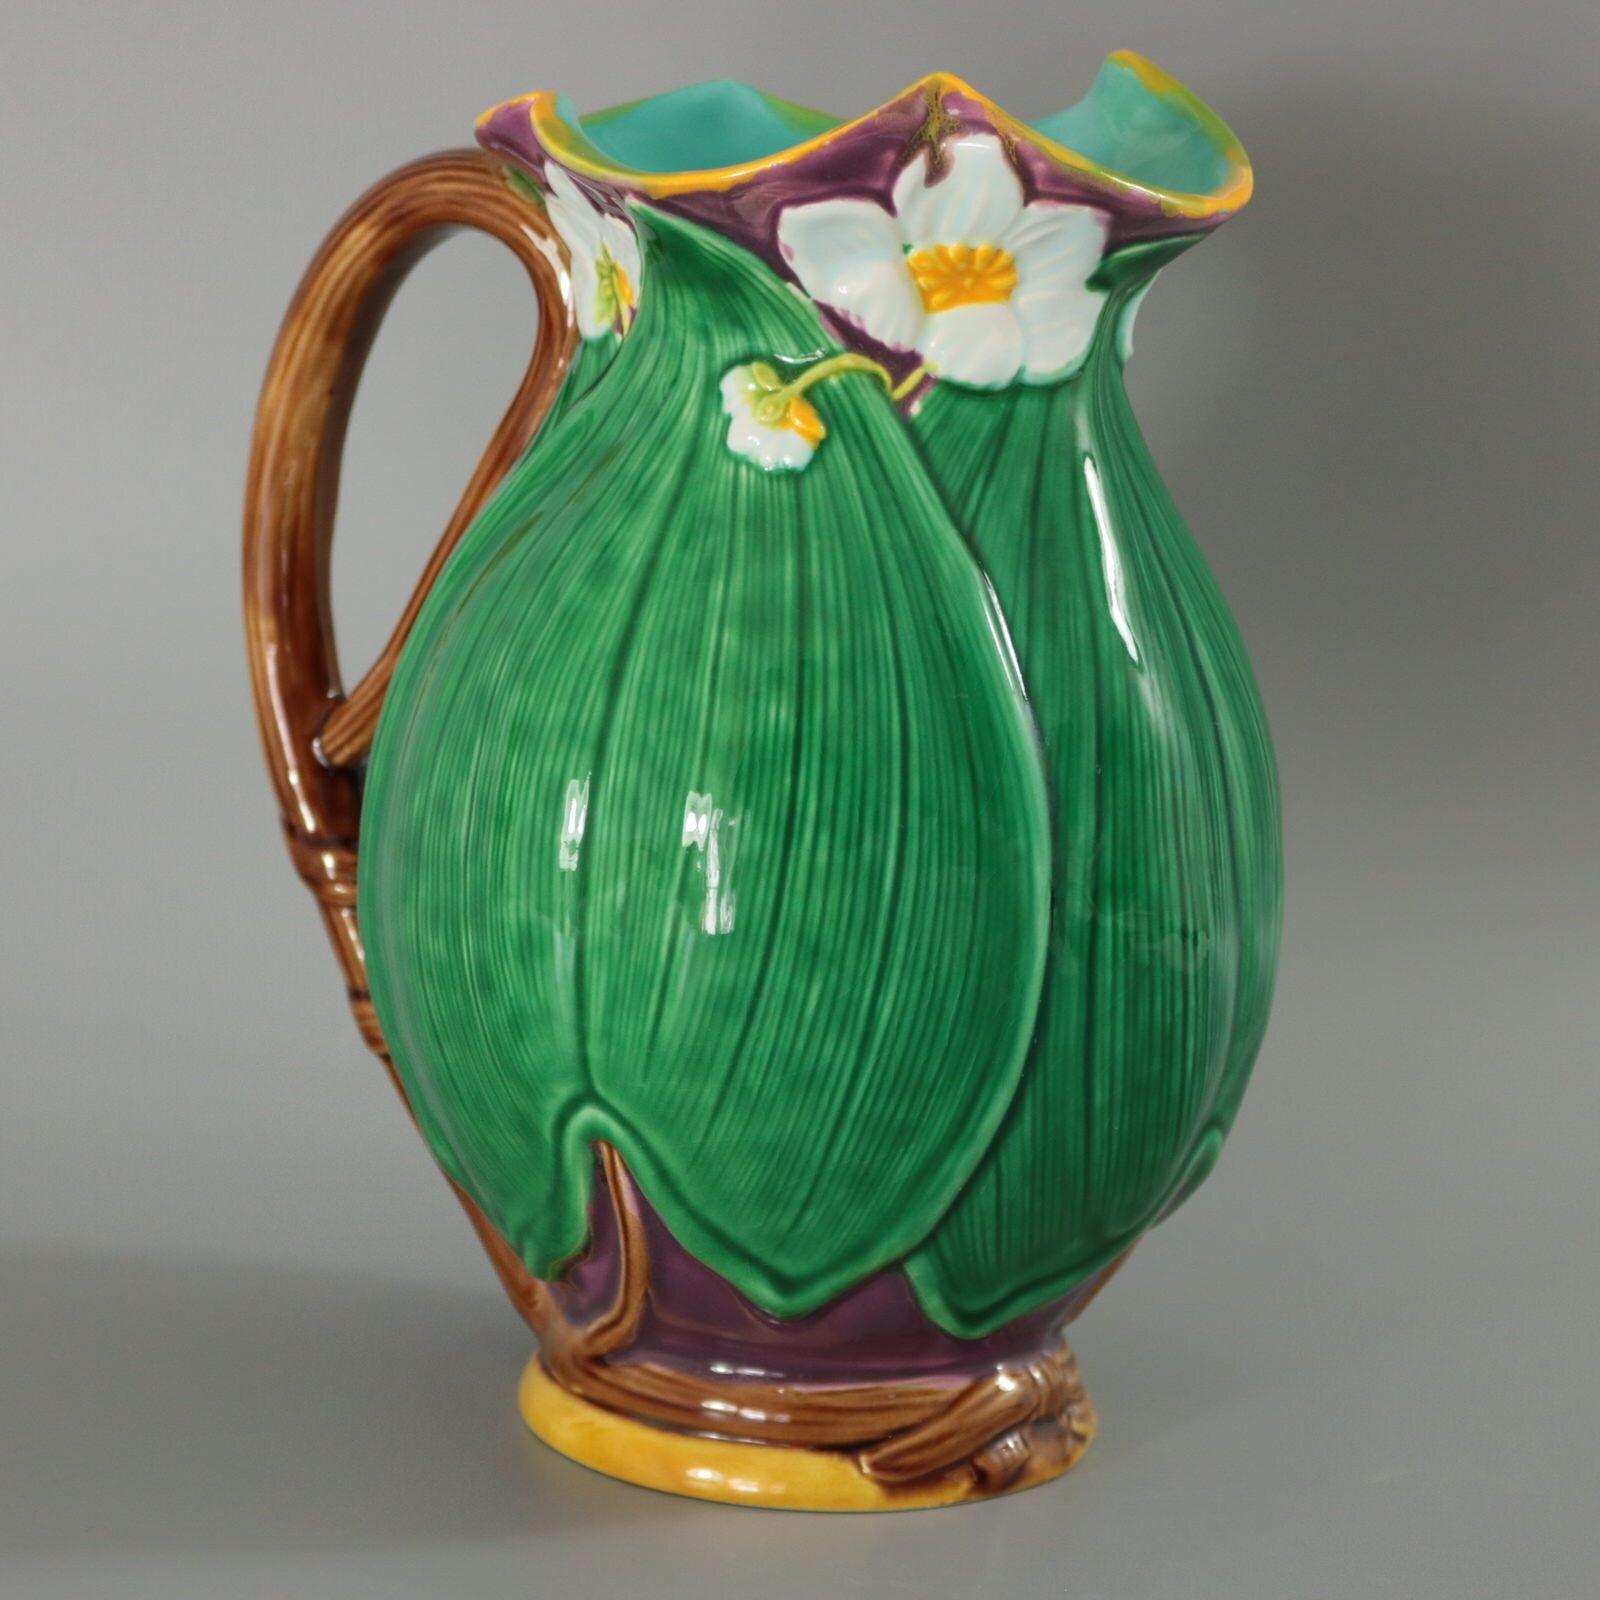 Minton Majolica jug/pitcher which features flowering lilies and lily pads. Colouration: green, dark pink, white, are predominant.